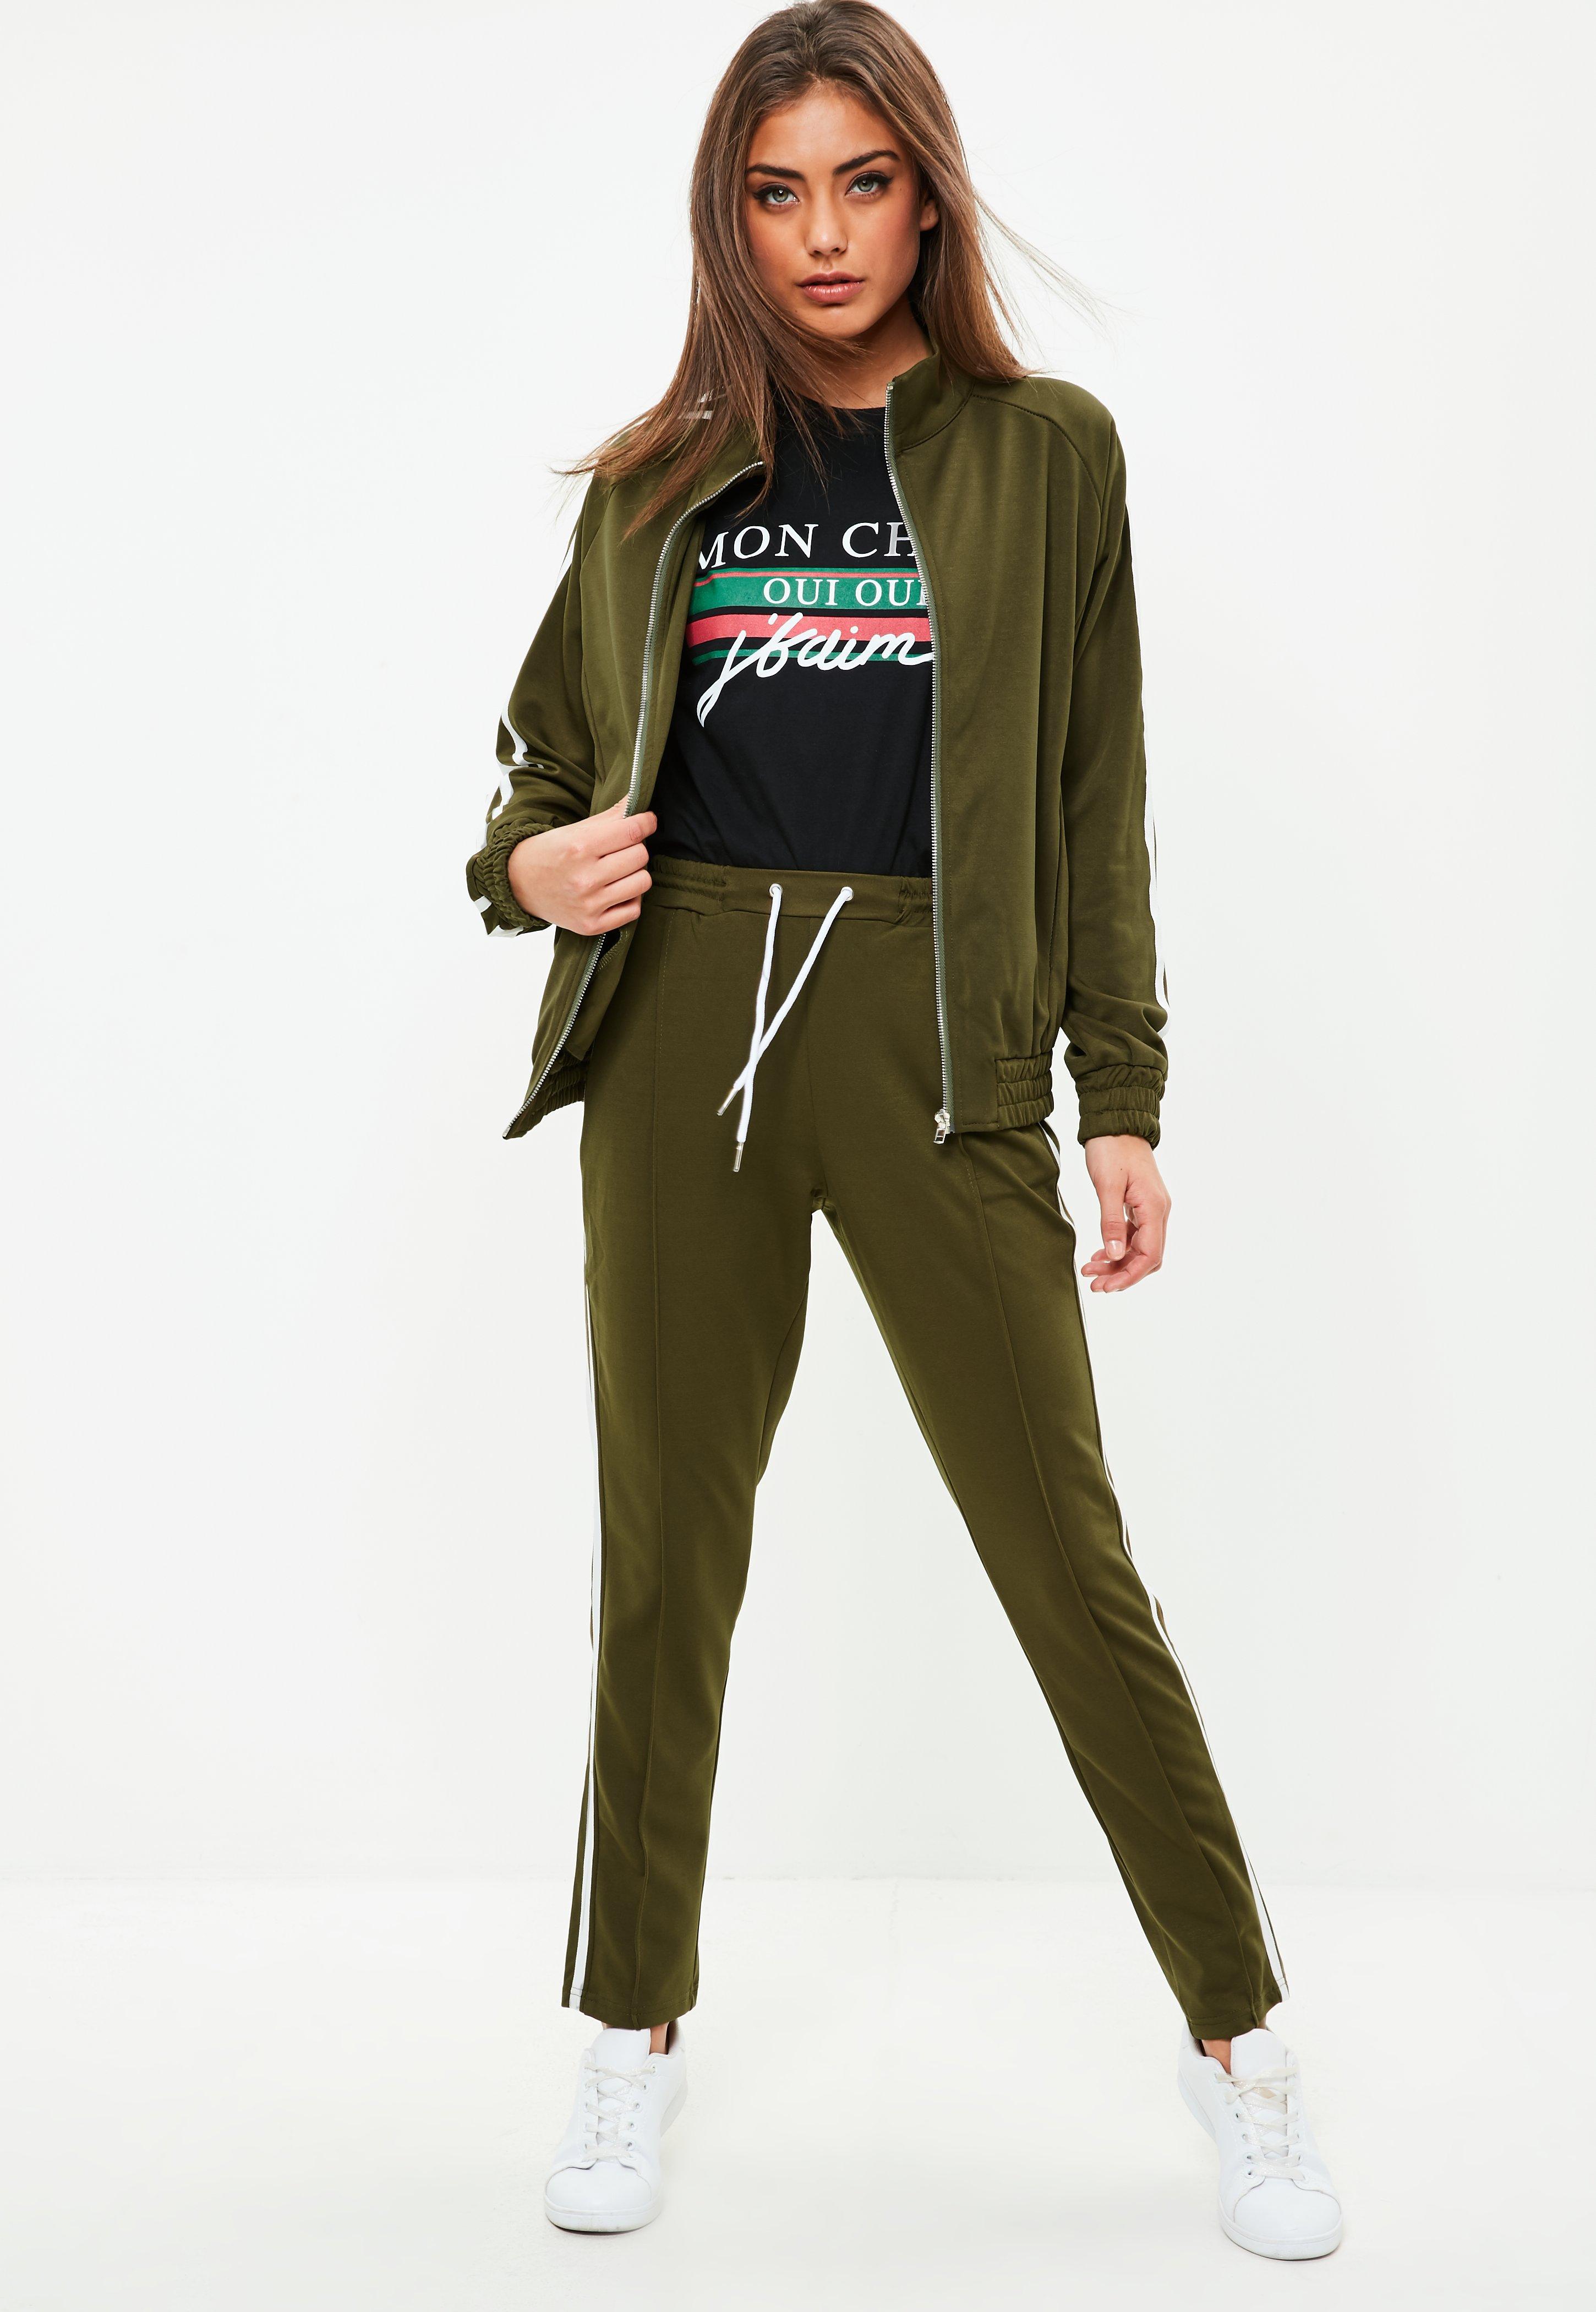 Lyst - Missguided Khaki Side Stripe Tracksuit Top in Green